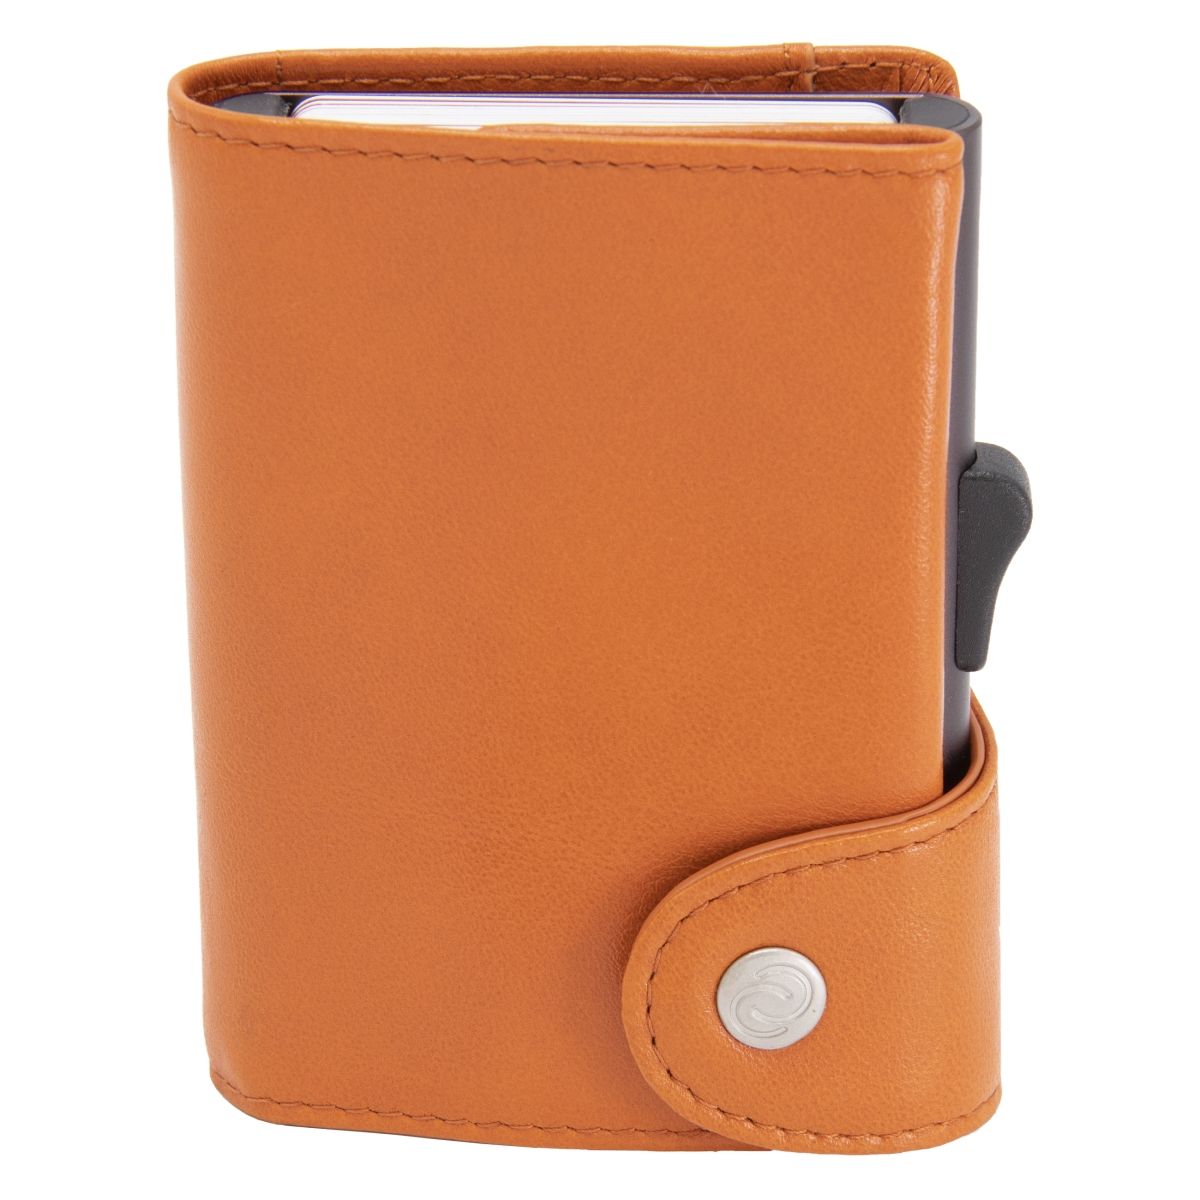 C-Secure XL Aluminum Wallet with Genuine Leather and Coins Pocket - Arancio